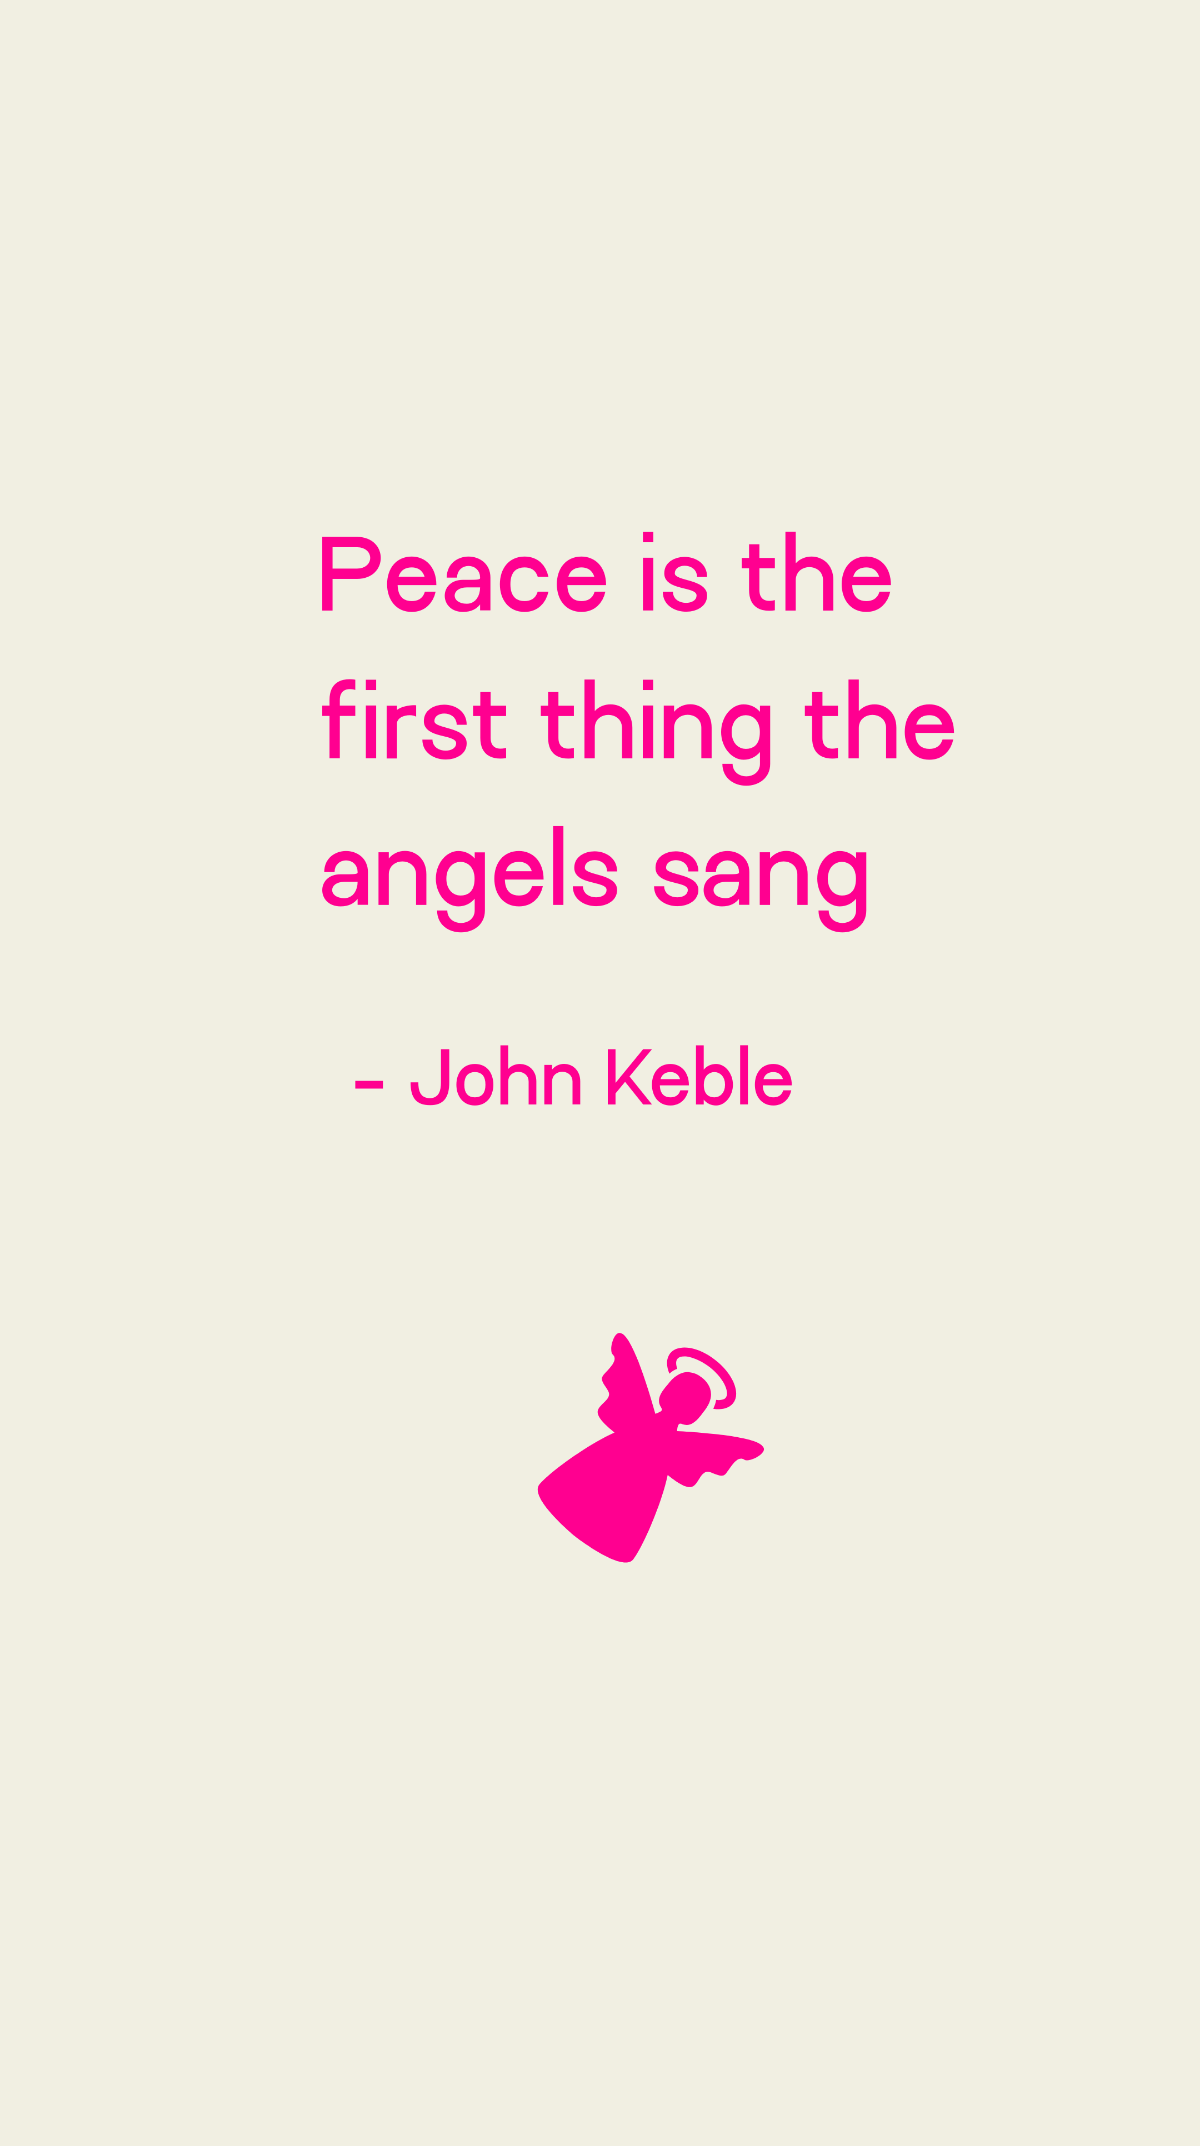 John Keble - Peace is the first thing the angels sang Template